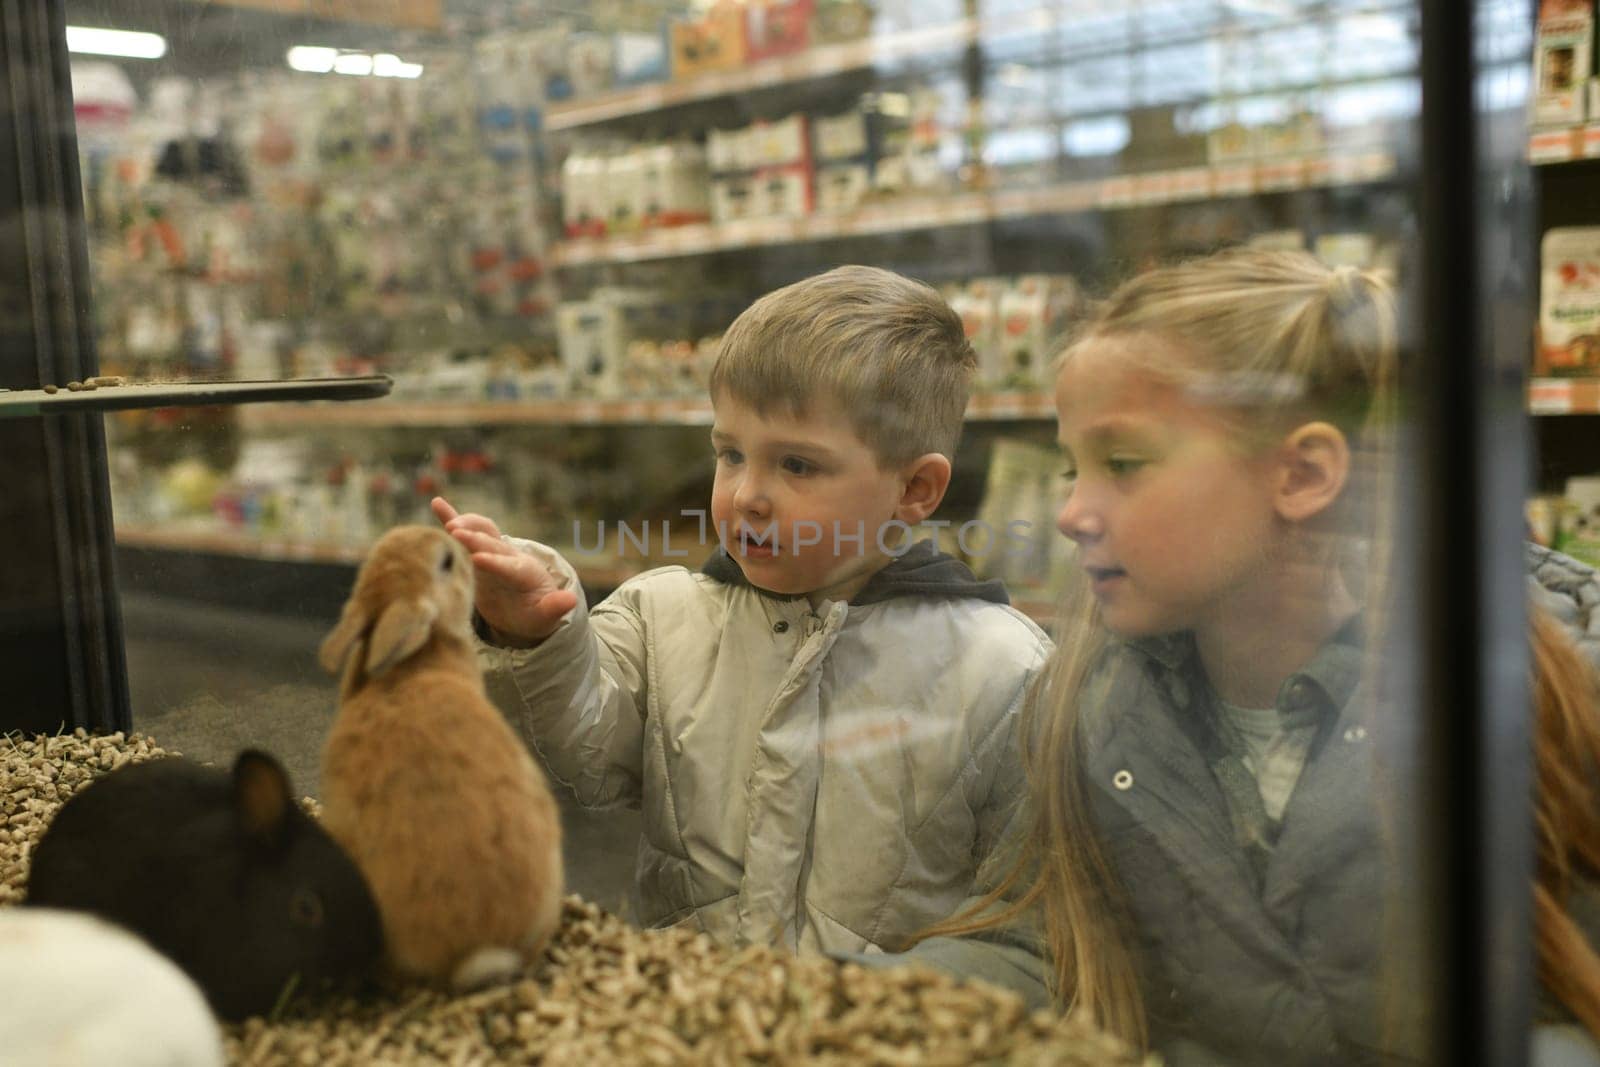 Rabbits for sale behind the glass showcase in a pet store and the kids